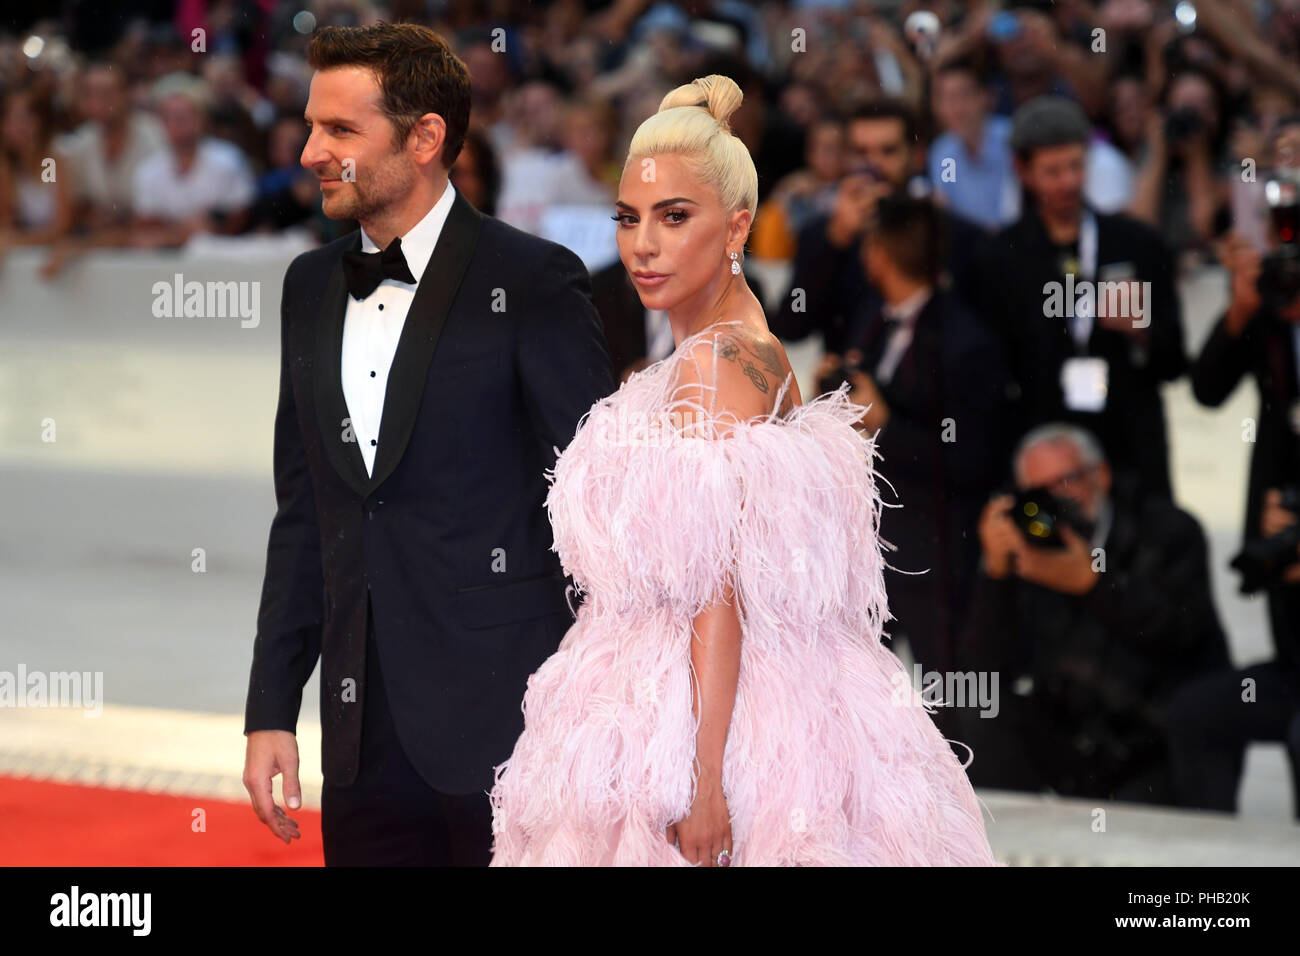 Venice, Italy. 31st Aug, 2018. The singer Lady Gaga and the actor and director Bradley Cooper walk the red carpet at the world premiere of the film musical 'A Star is Born' at the Venice Film Festival. The film festival runs from 29 August to 8 September and is taking place for the 75th time this year. Credit: Felix Hörhager/dpa/Alamy Live News Stock Photo